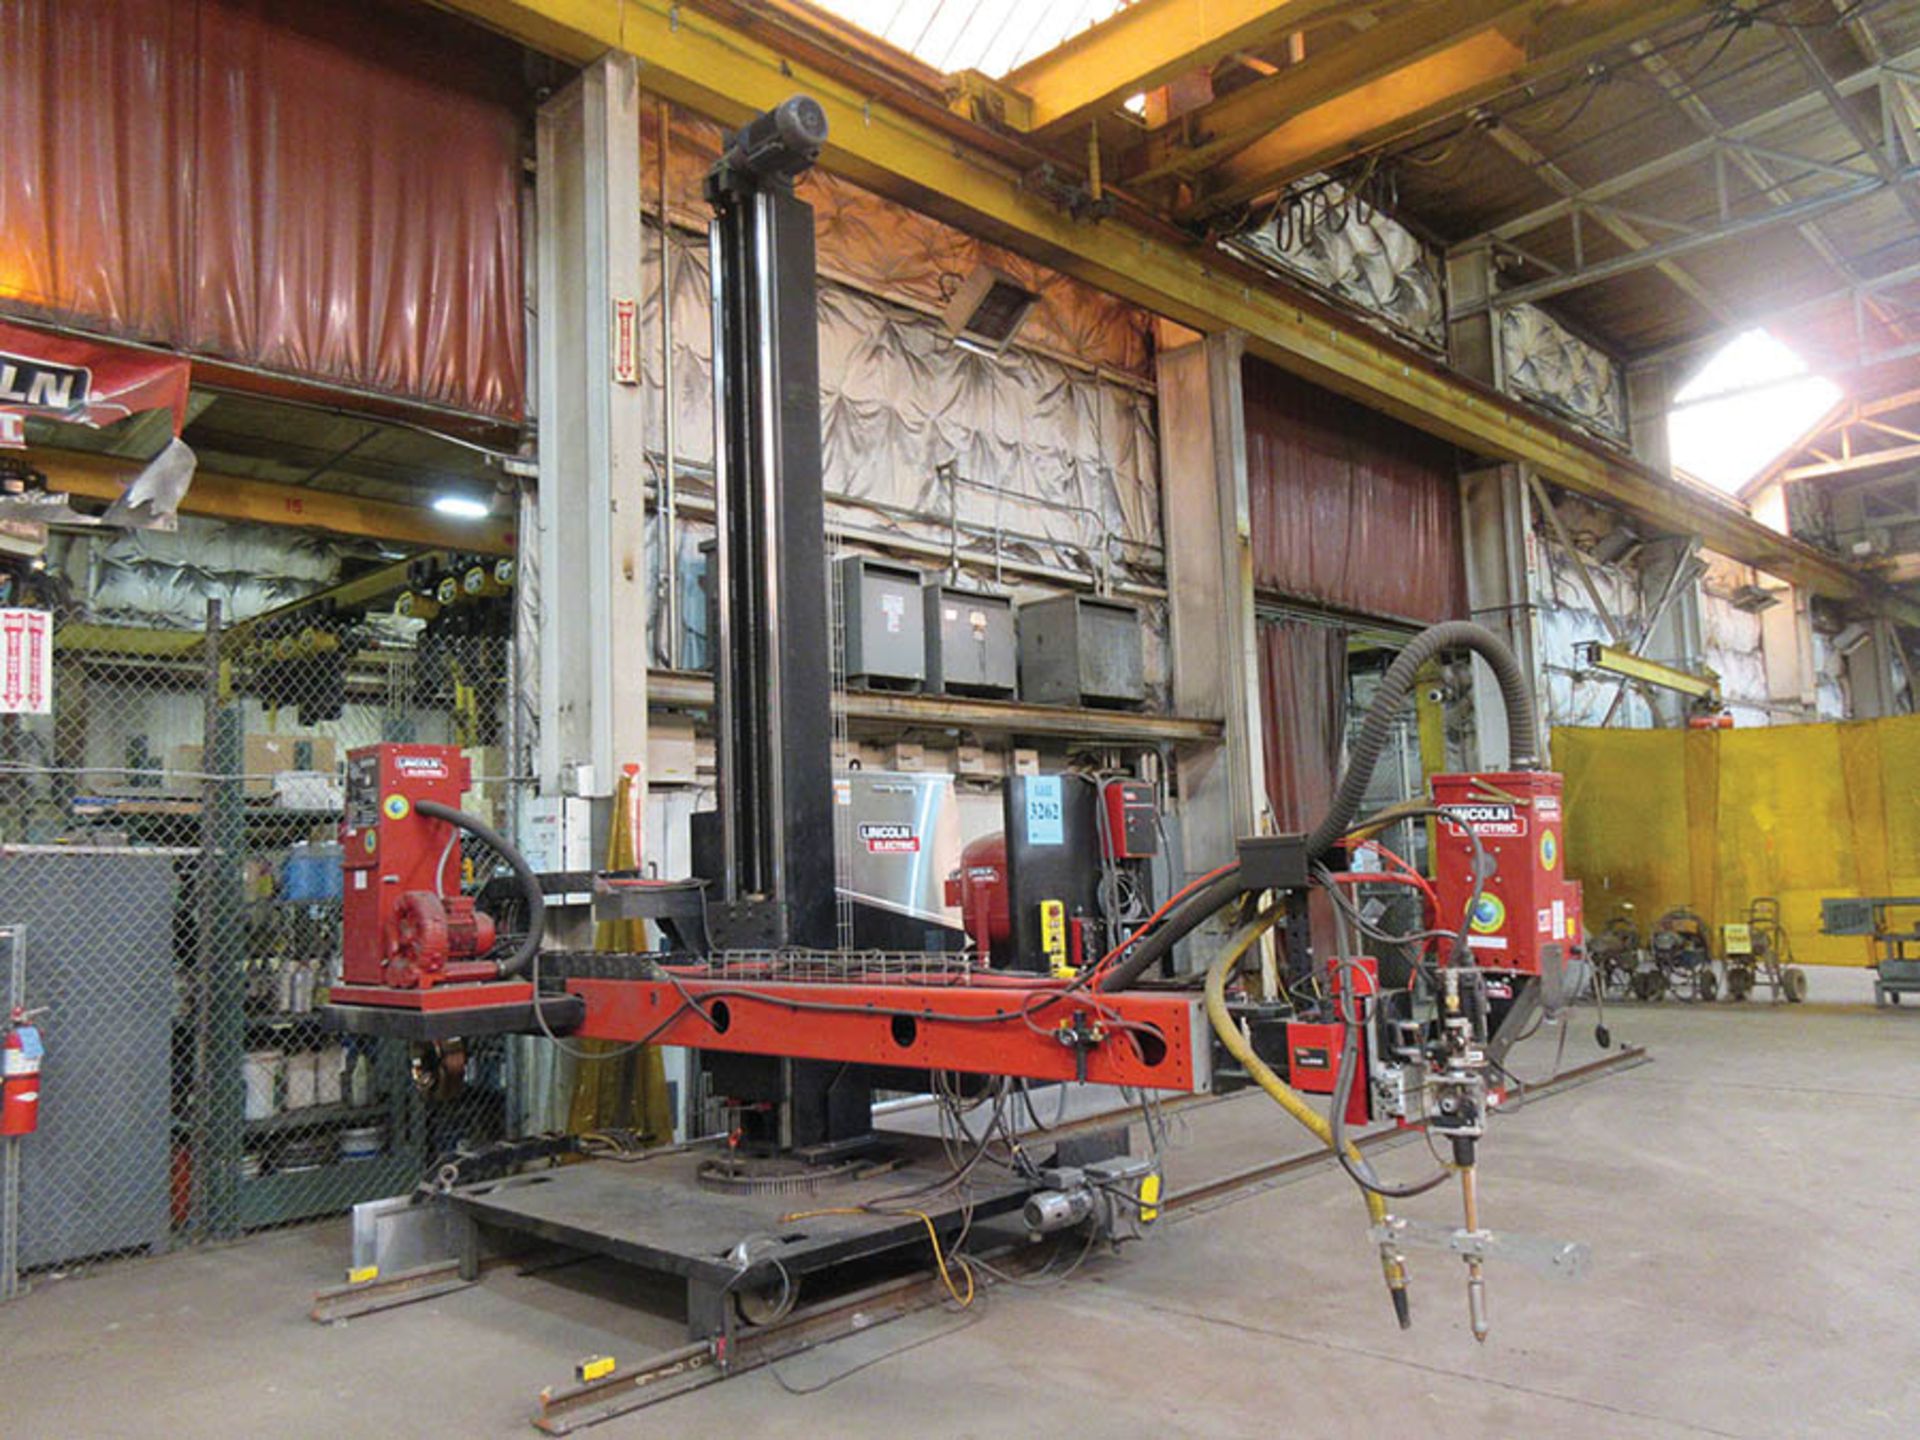 2019 LINCOLN ELECTRIC PANTHEON SUBMERGED ARC 12' WELDING MANIPULATOR SYSTEM ON TRAVEL CART, PROJECT: